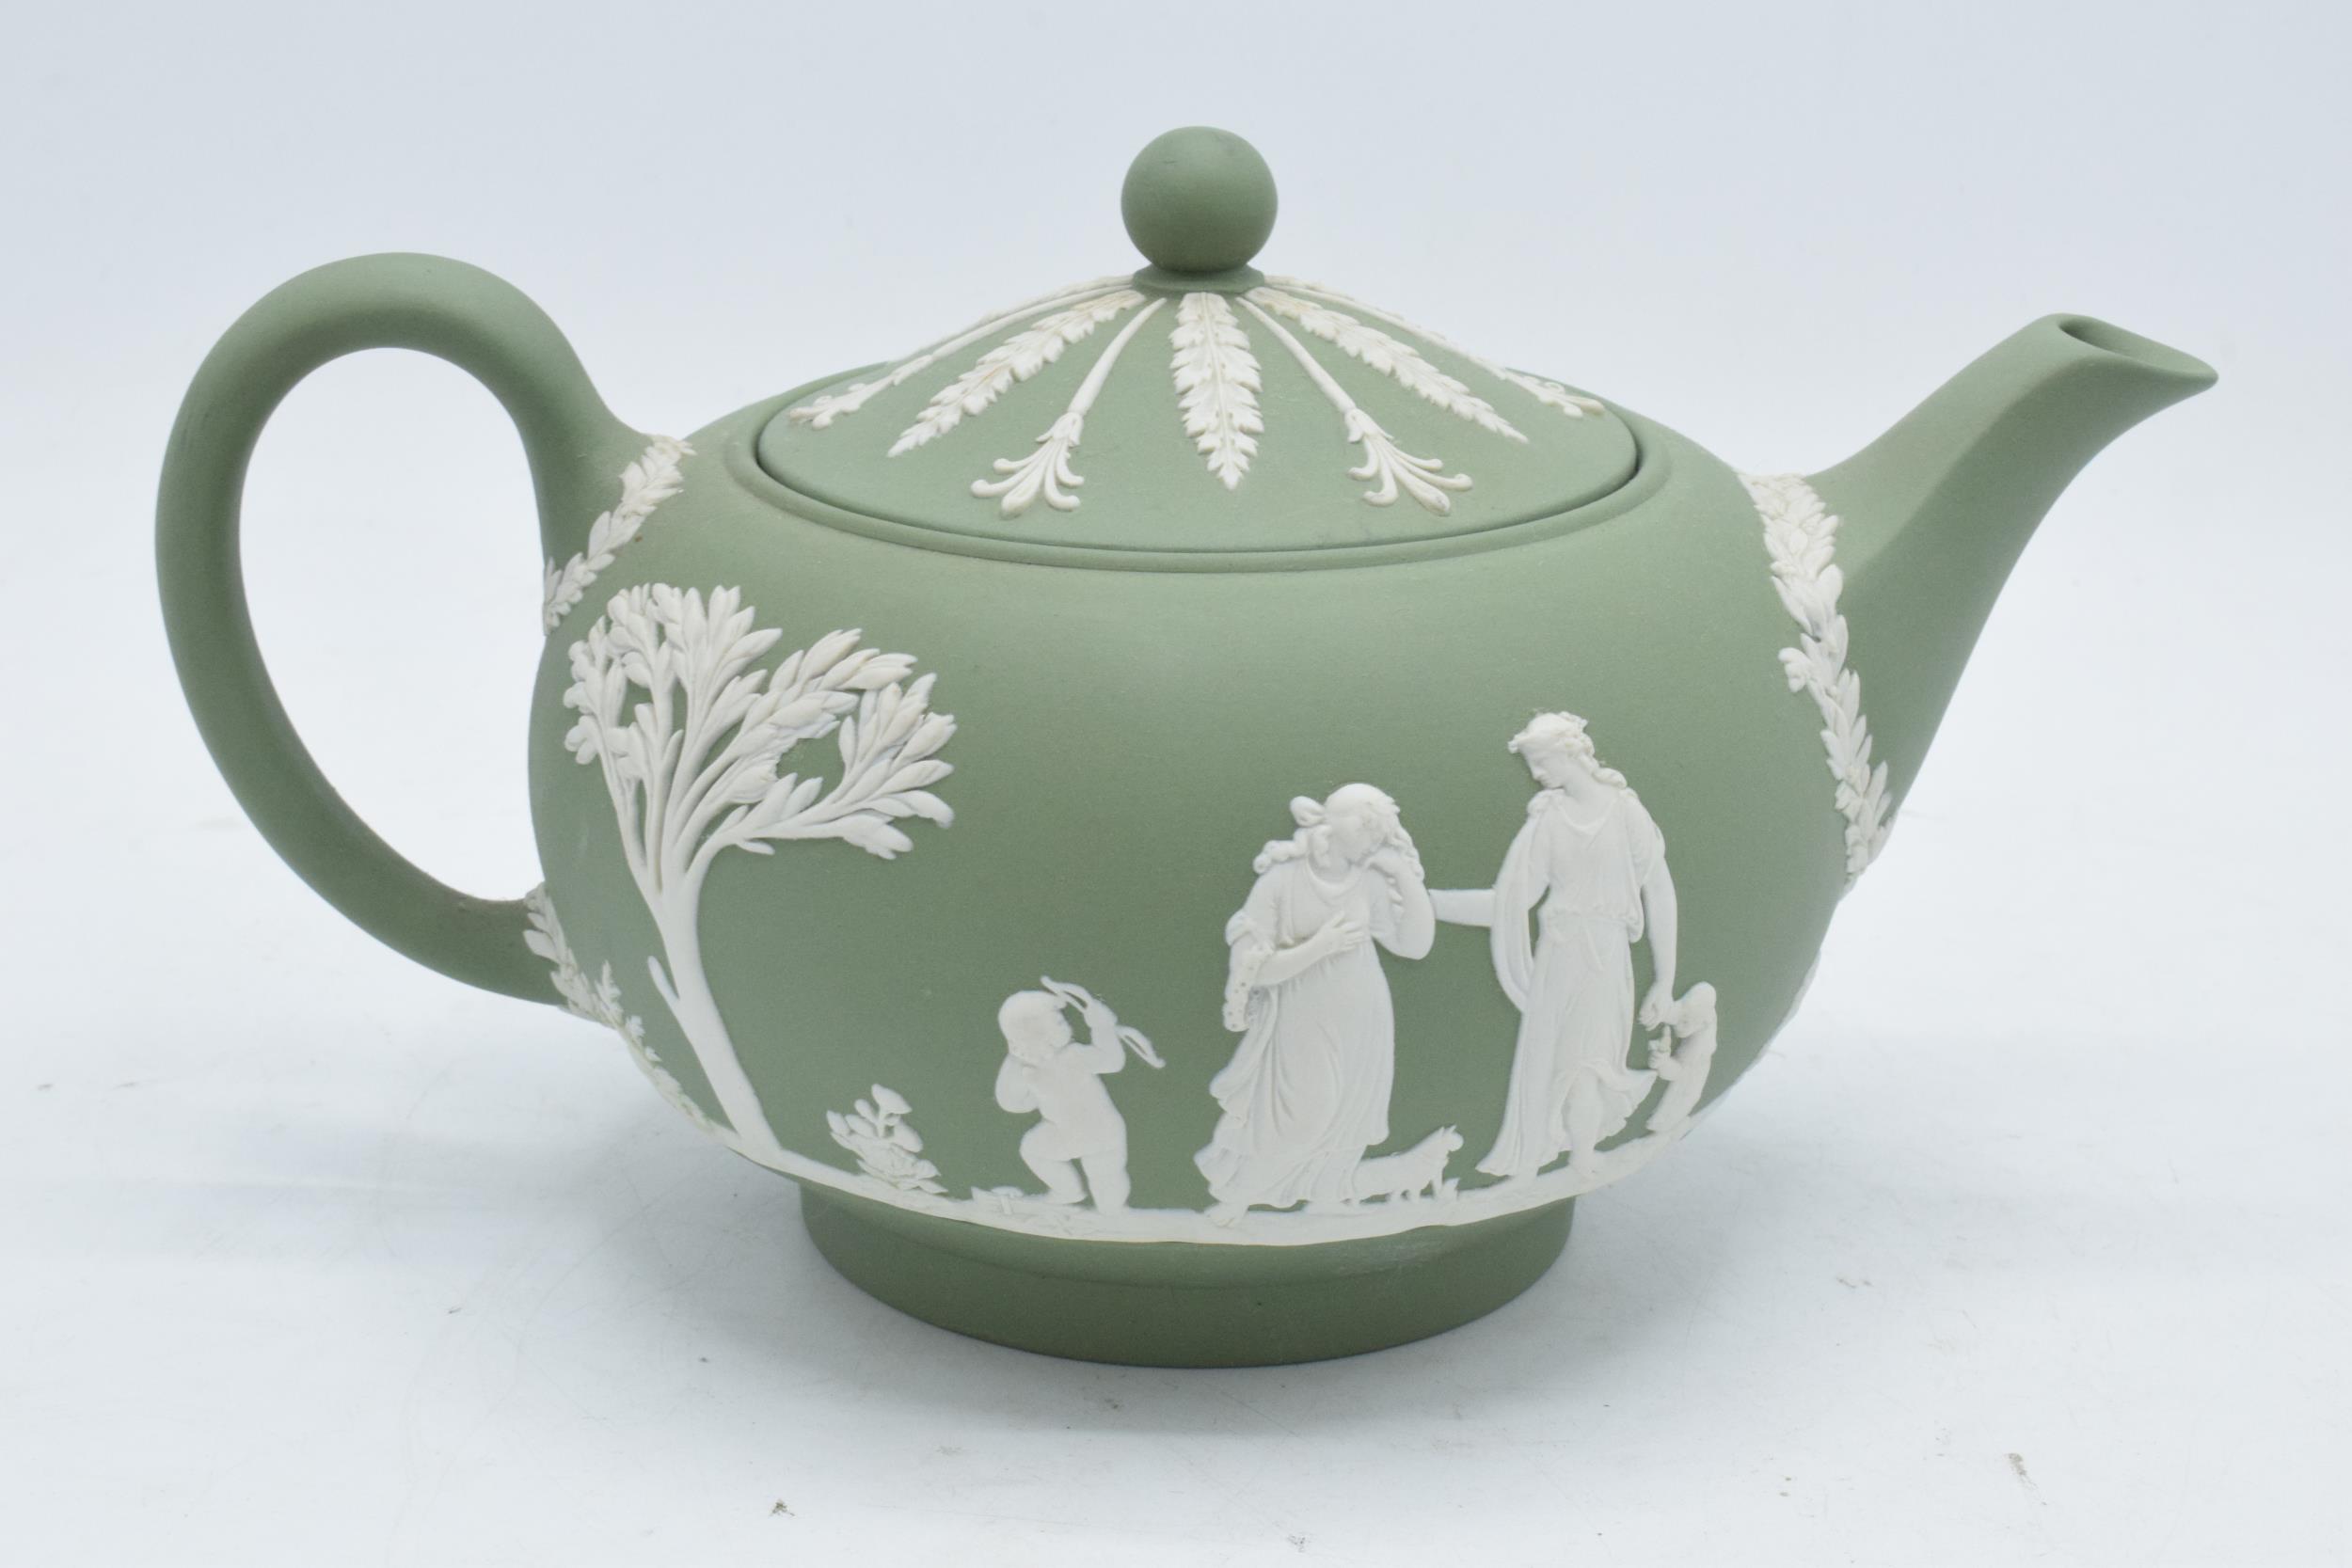 Wedgwood Sage Green Jasperware teapot. In good condition with no obvious damage or restoration. - Image 2 of 3